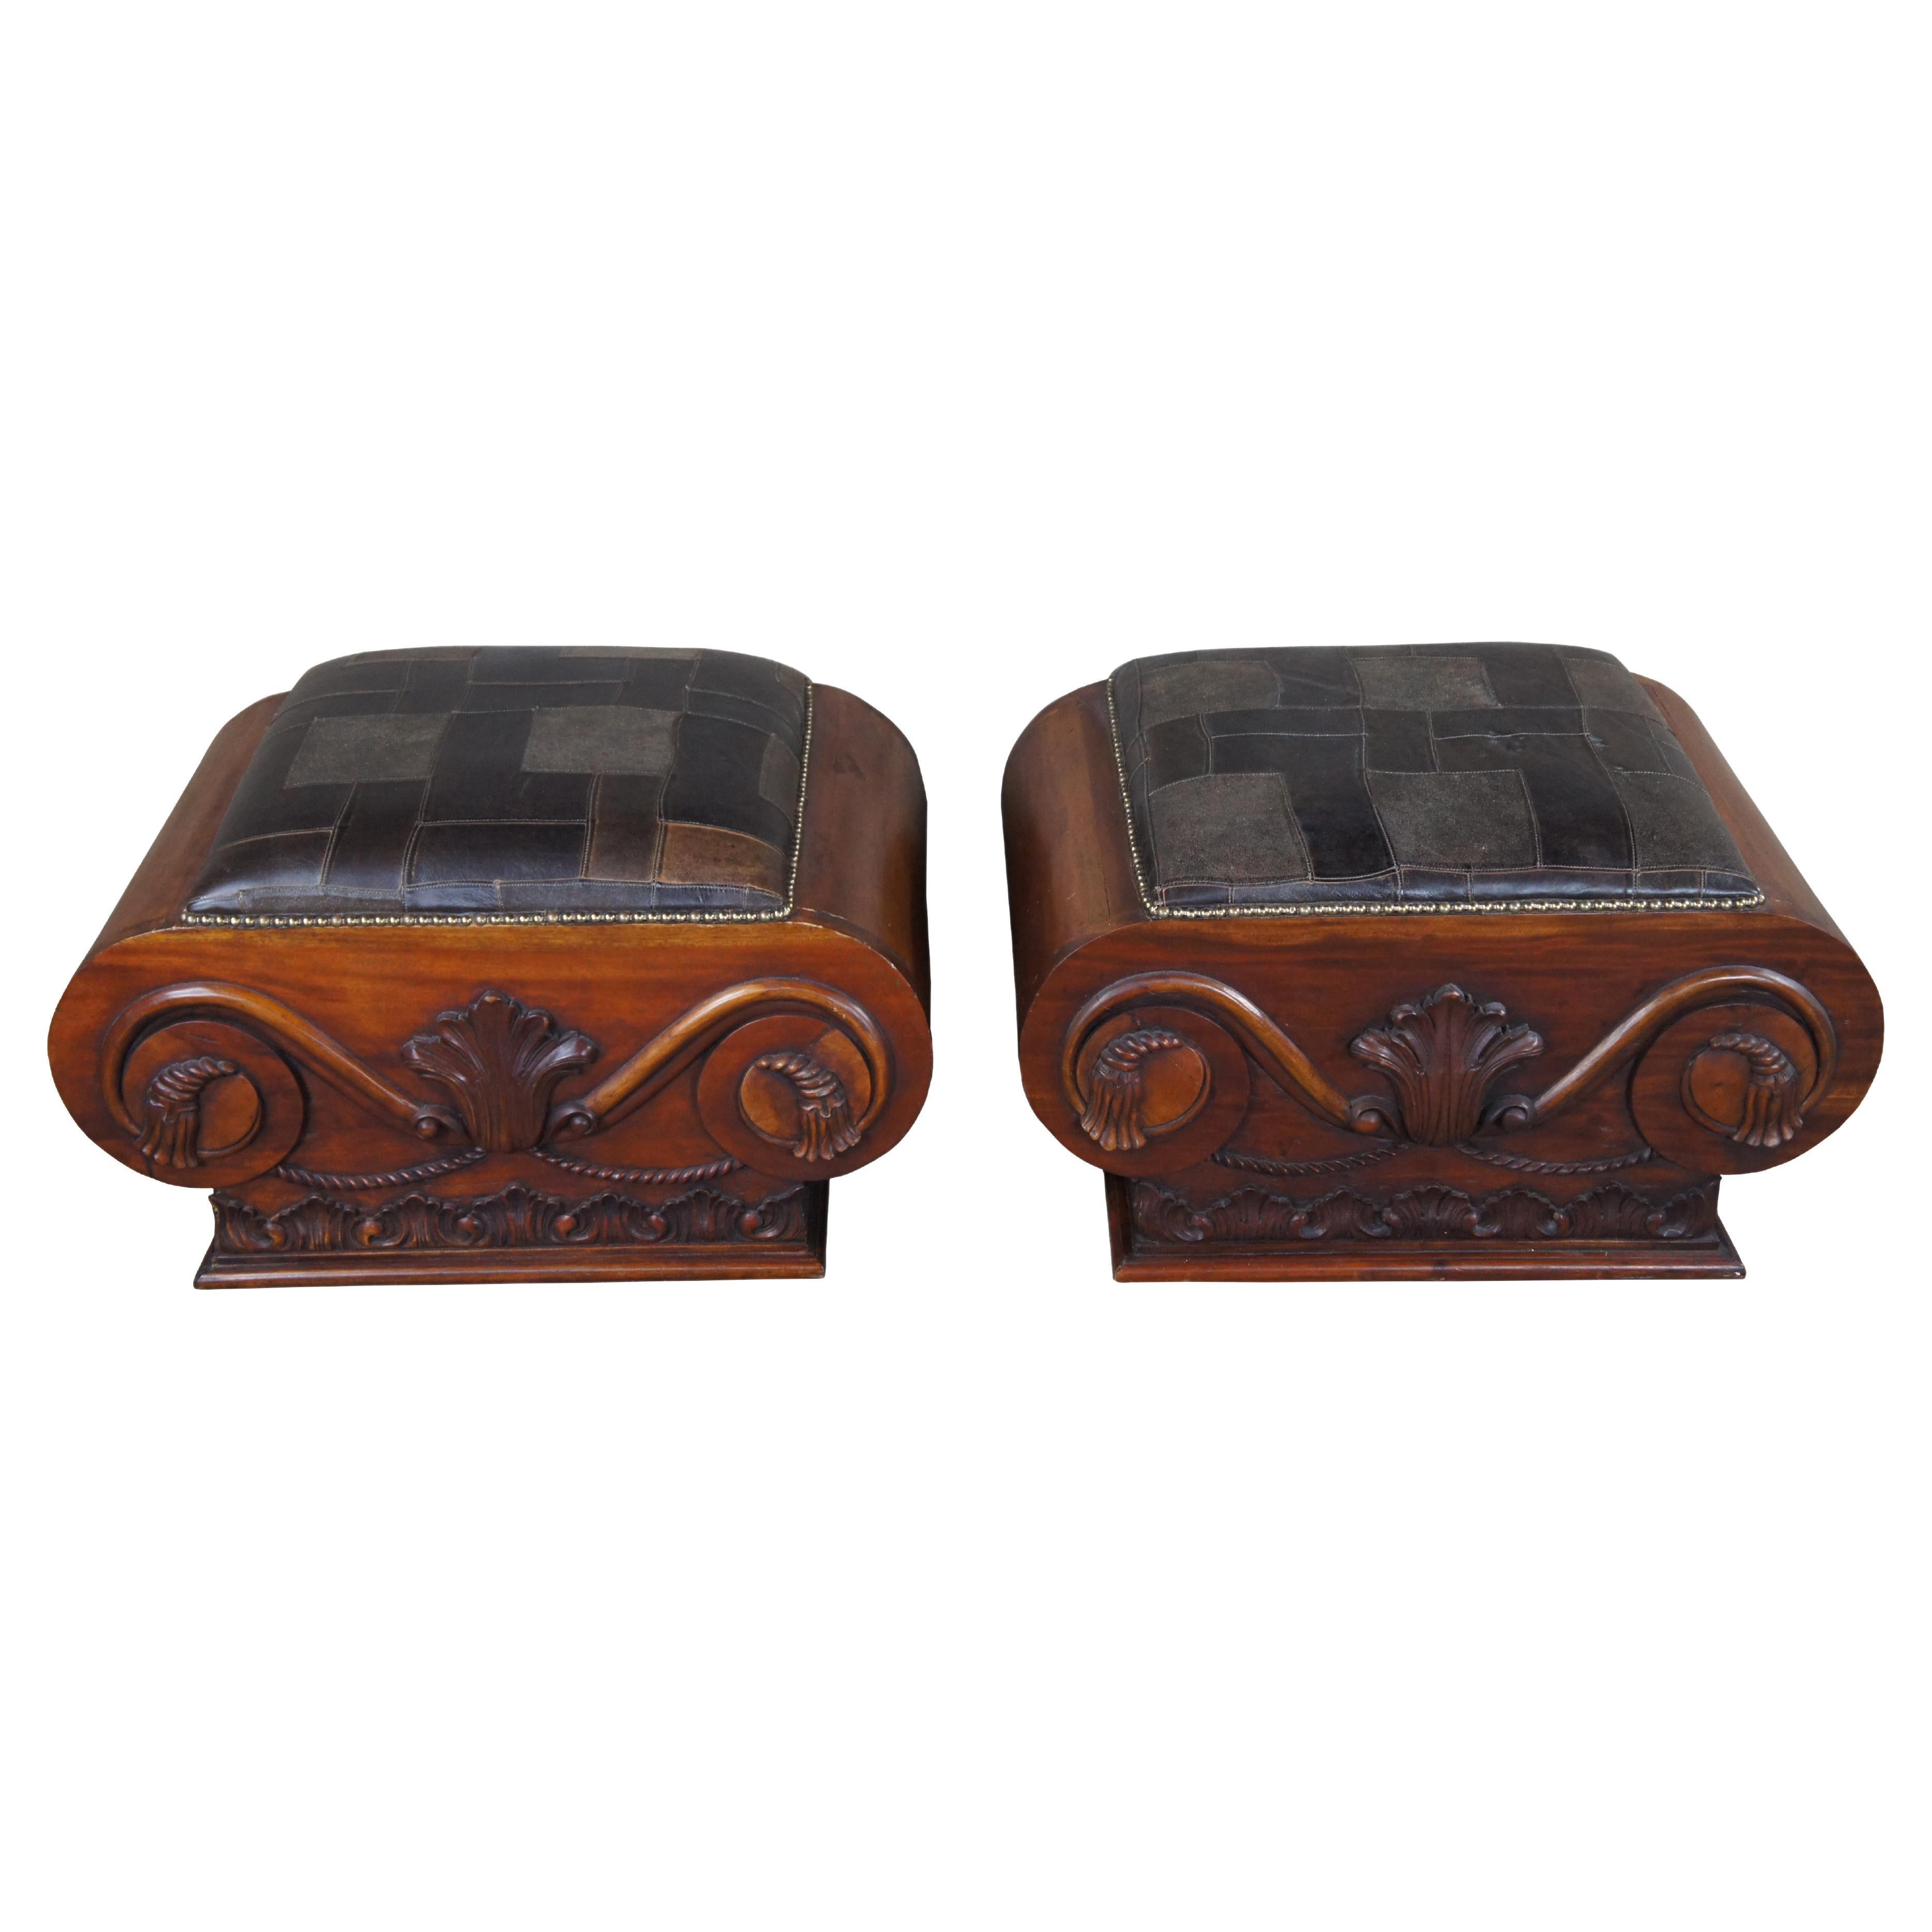 2 Traditional Grecian Roman Capital Carved Mahogany & Leather Ottomans Stools For Sale